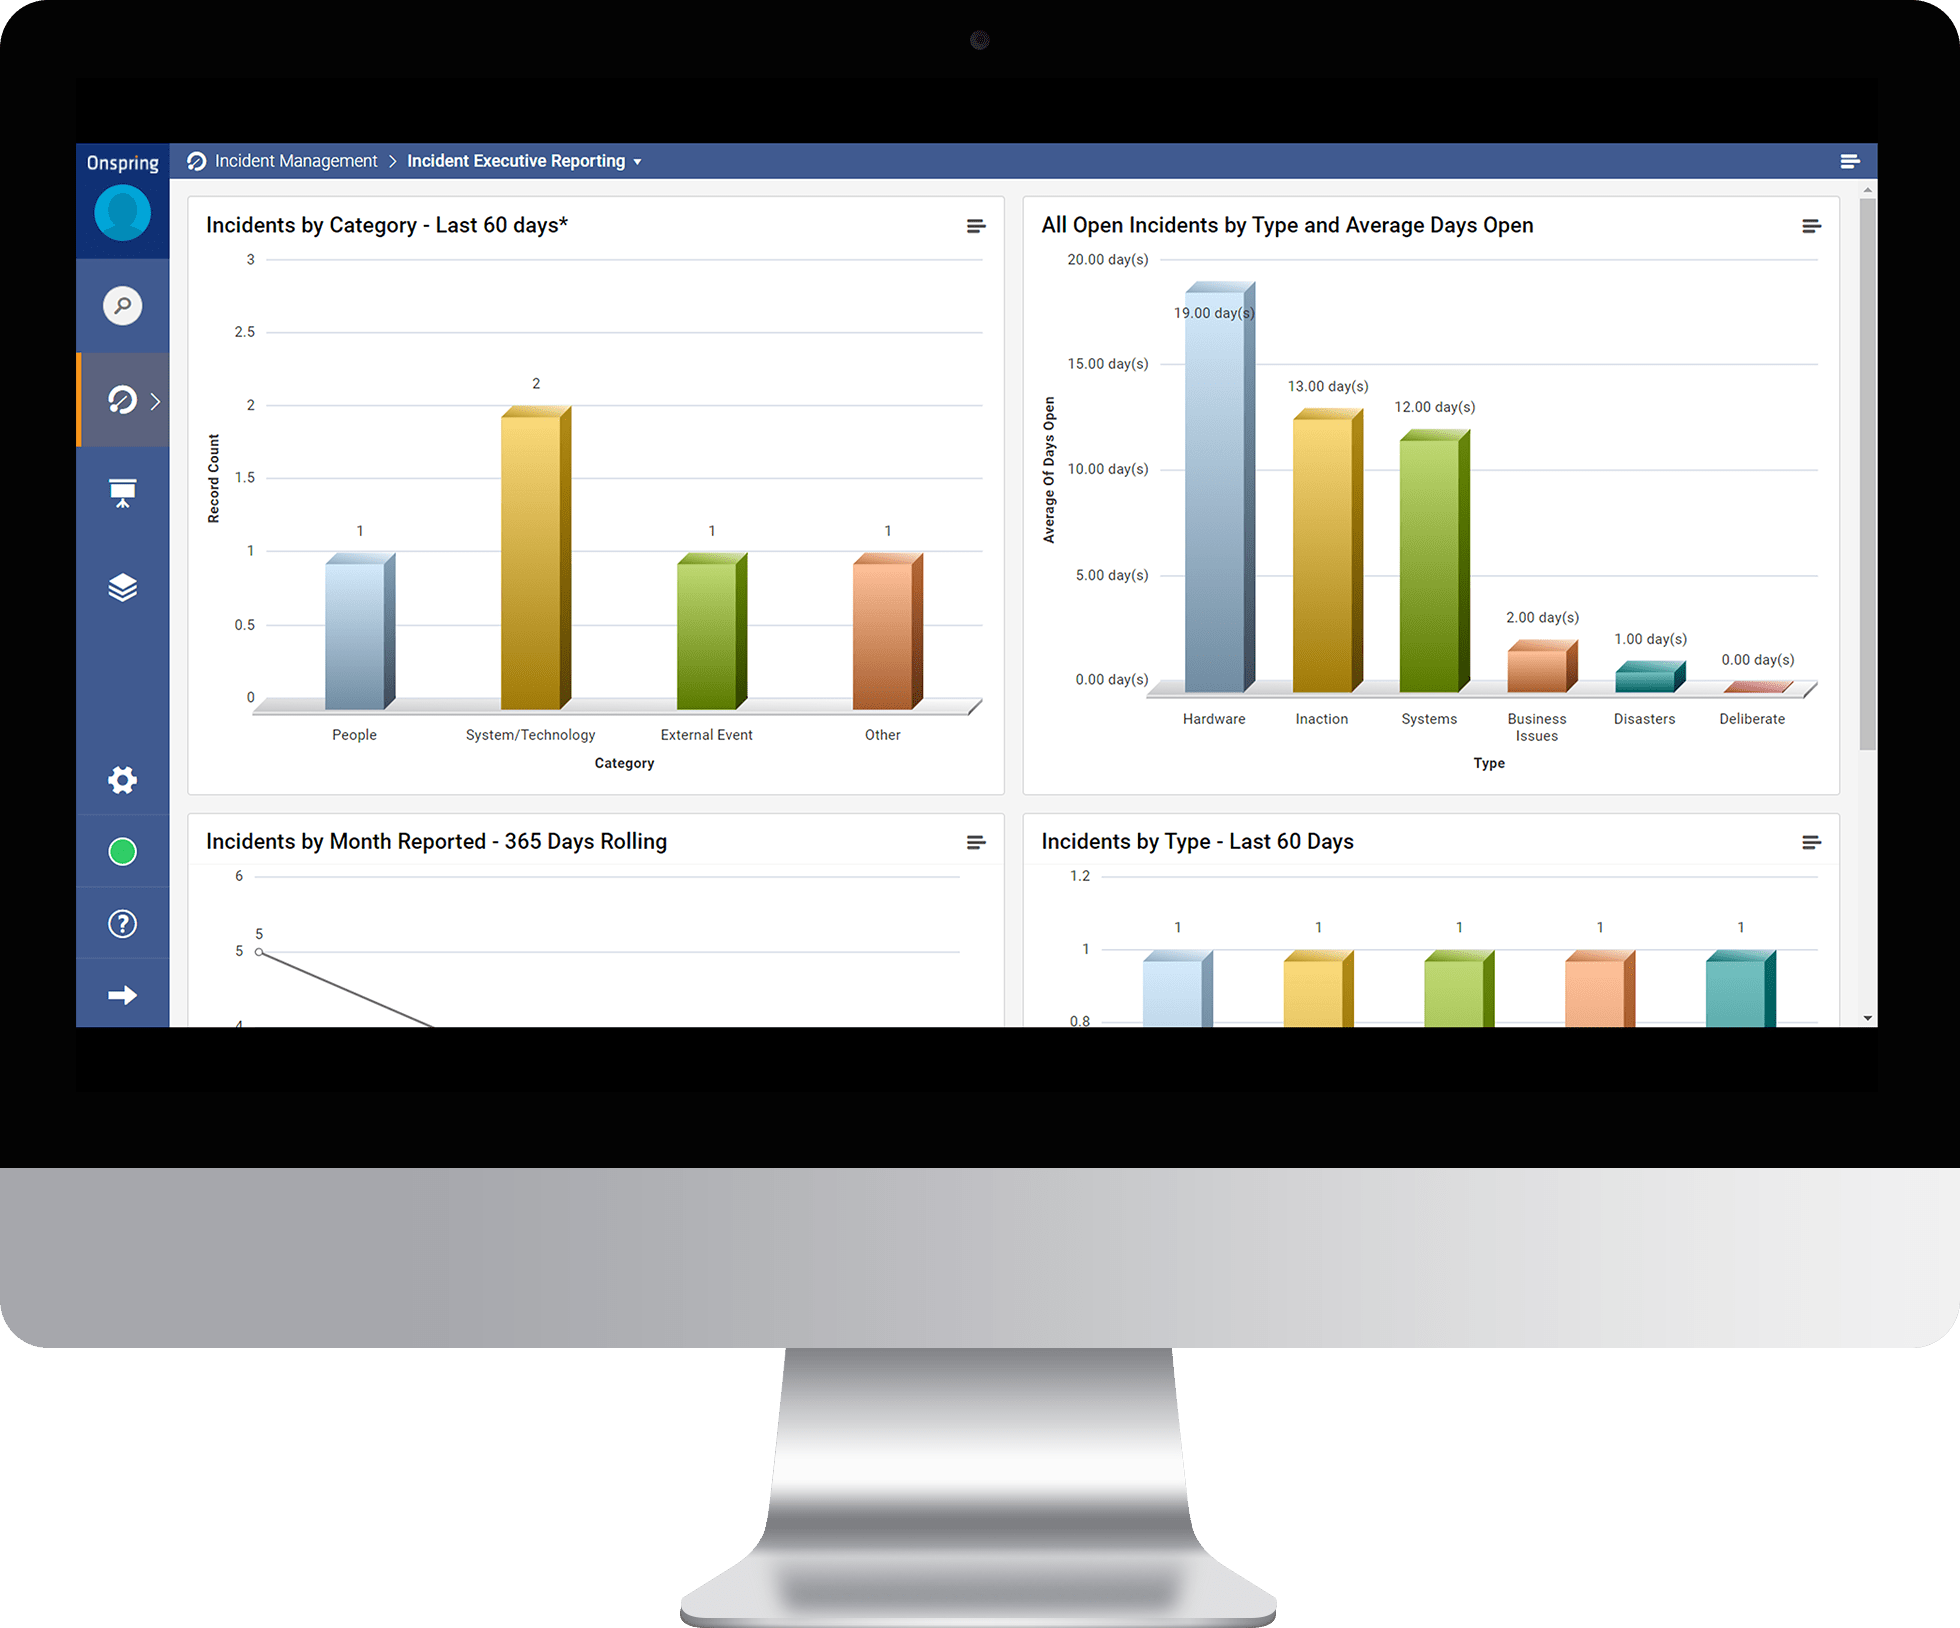 Incident Reporting Analytics from Onspring GRC Software